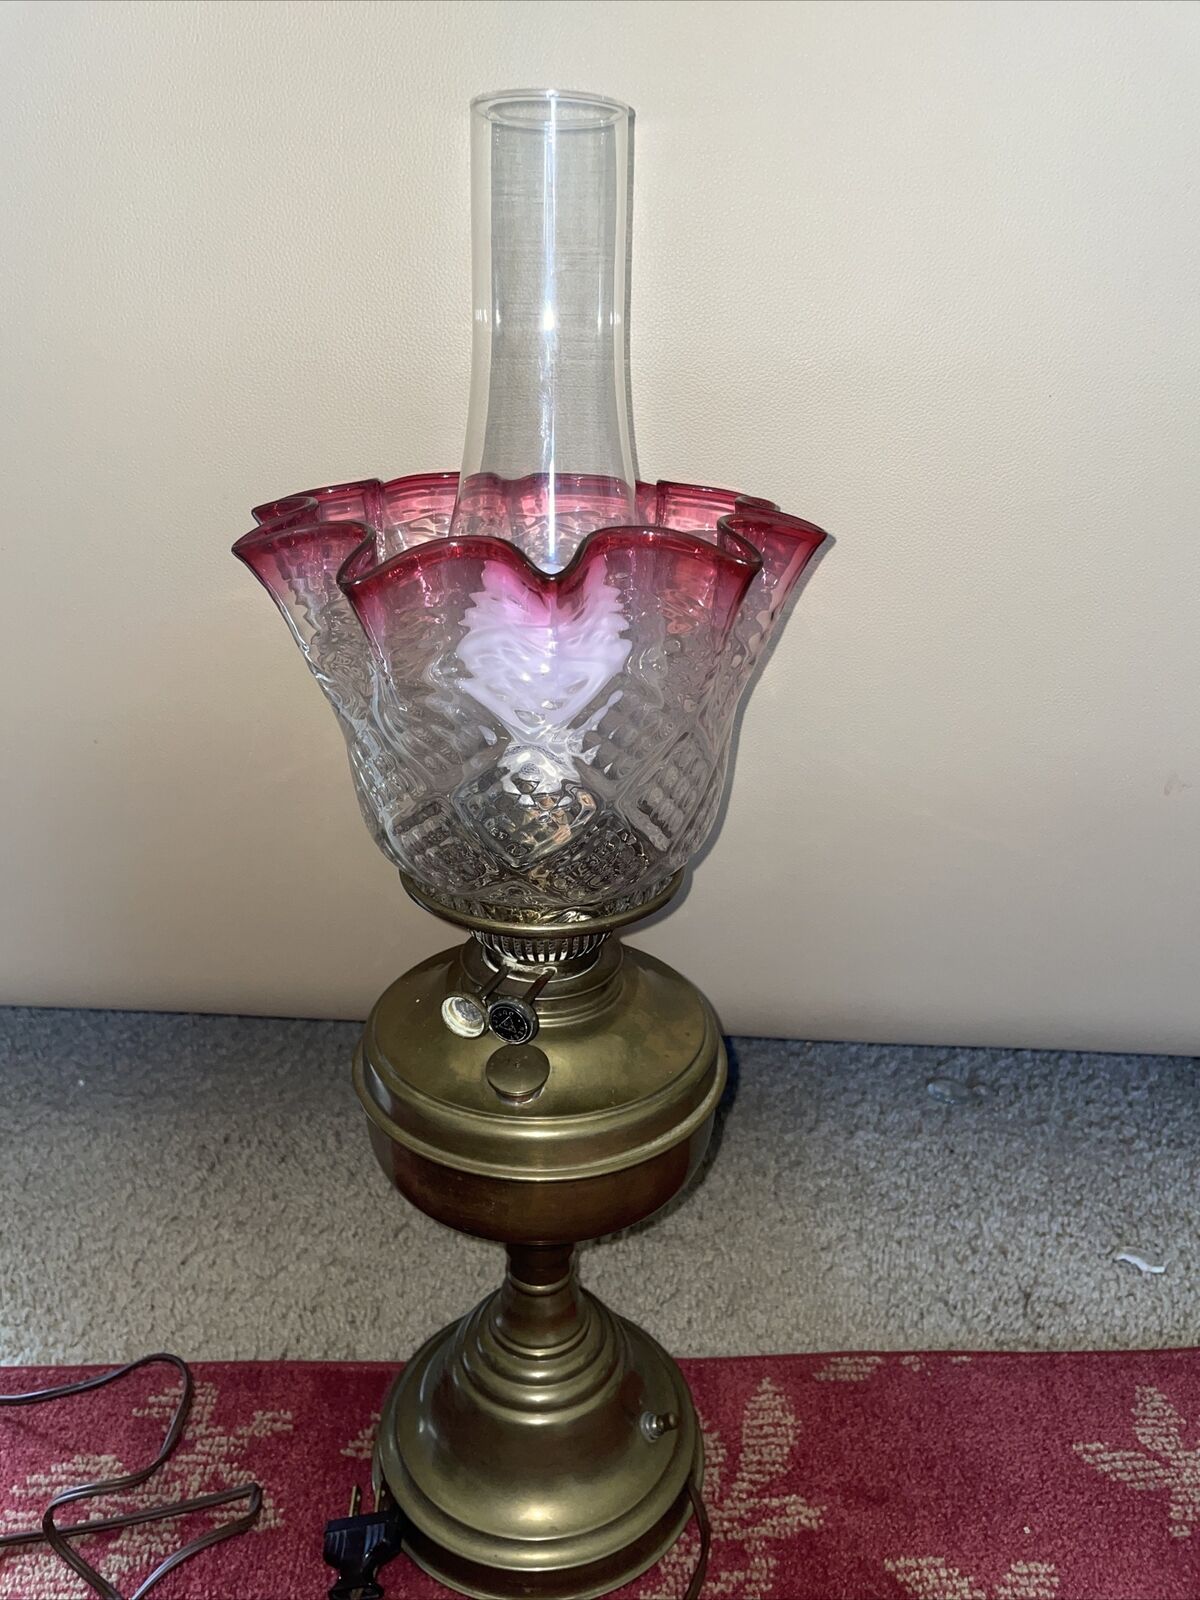 Victorian Oil Lamp With Cranberry Glass Shade And Silver Plated Body Converted